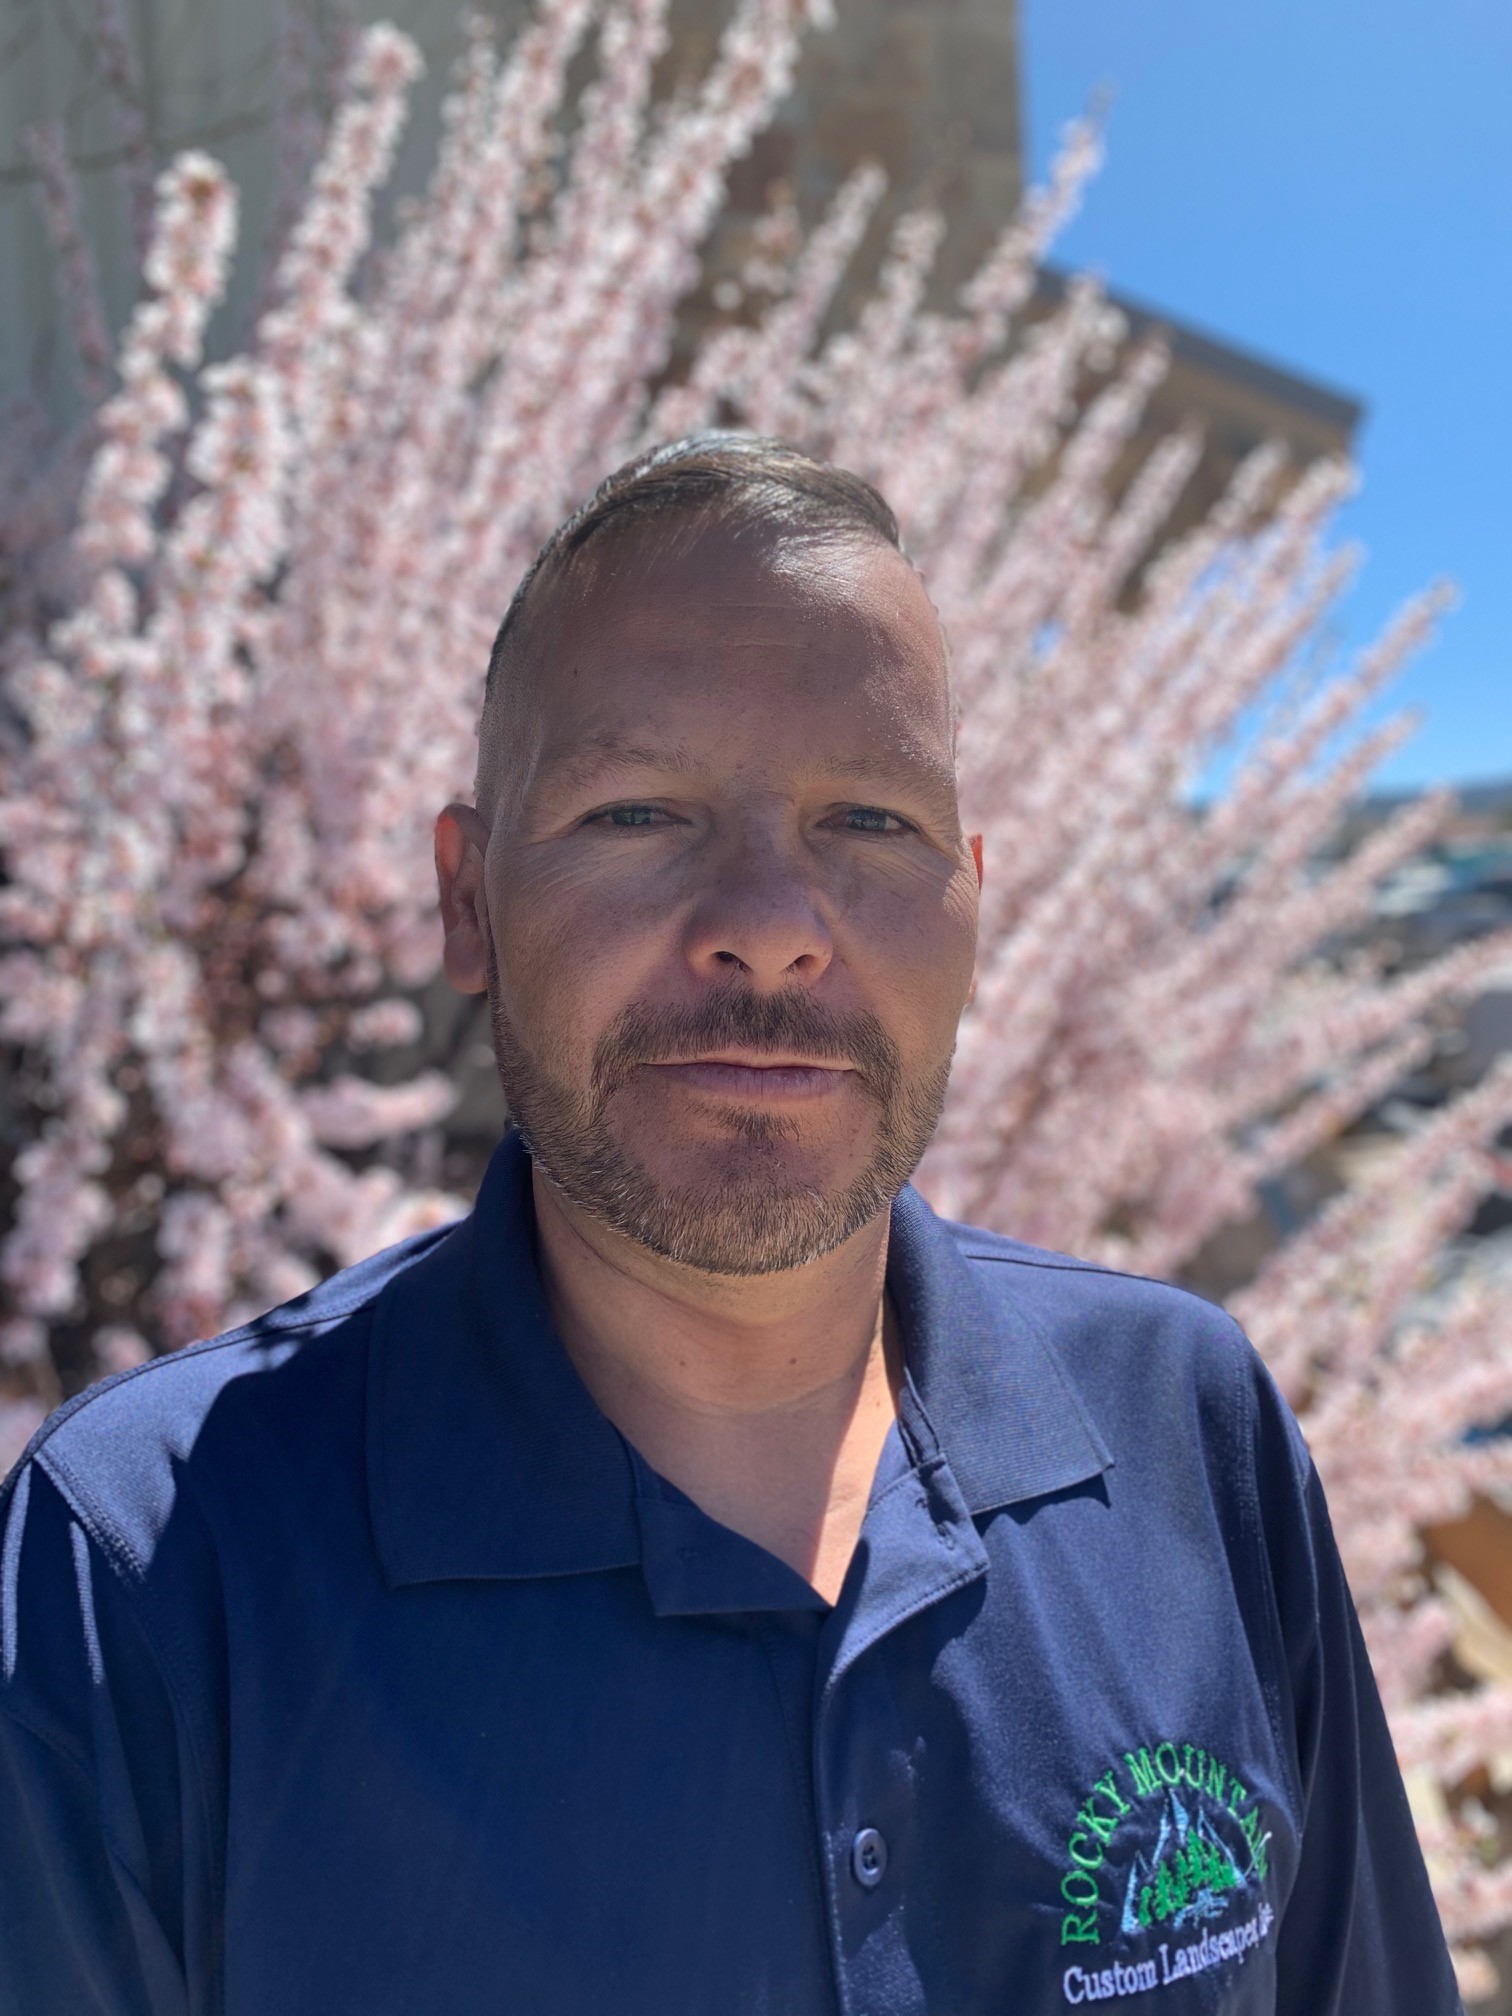 A person with short hair and a goatee is standing in front of pink blooming trees on a sunny day, wearing a blue shirt with an embroidered logo.